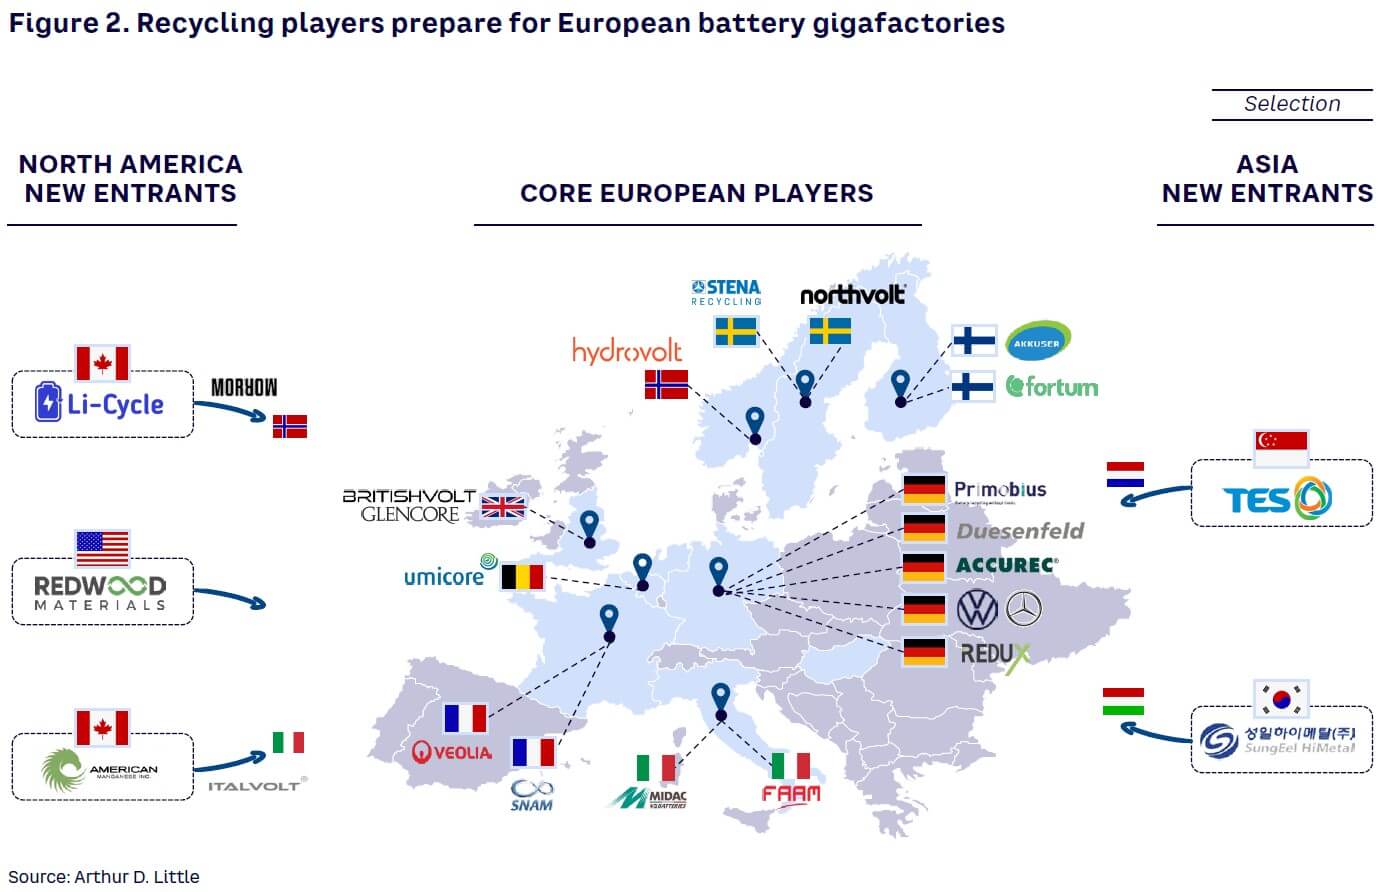 Figure 2. Recycling players prepare for European battery gigafactories